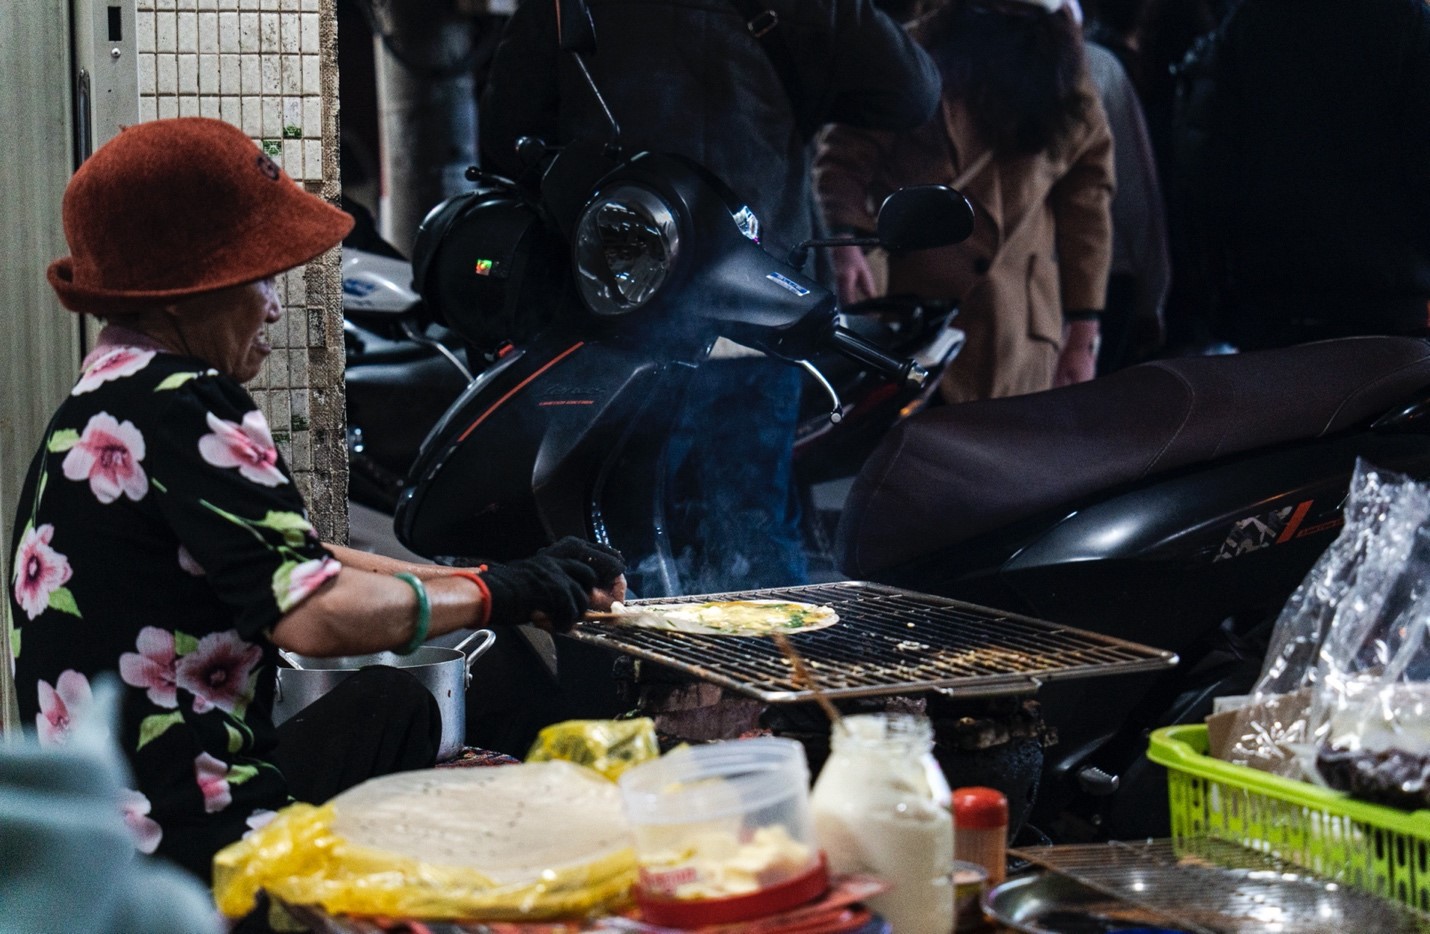 “Ba Khung” (Crazy lady) makes banh trang nuong (grilled rice paper), which is considered Vietnamese pizza. Her stall is one of the most famous banh trang nuong stalls in Da Lat. Photo: Nguyen Trung Au / Tuoi Tre News